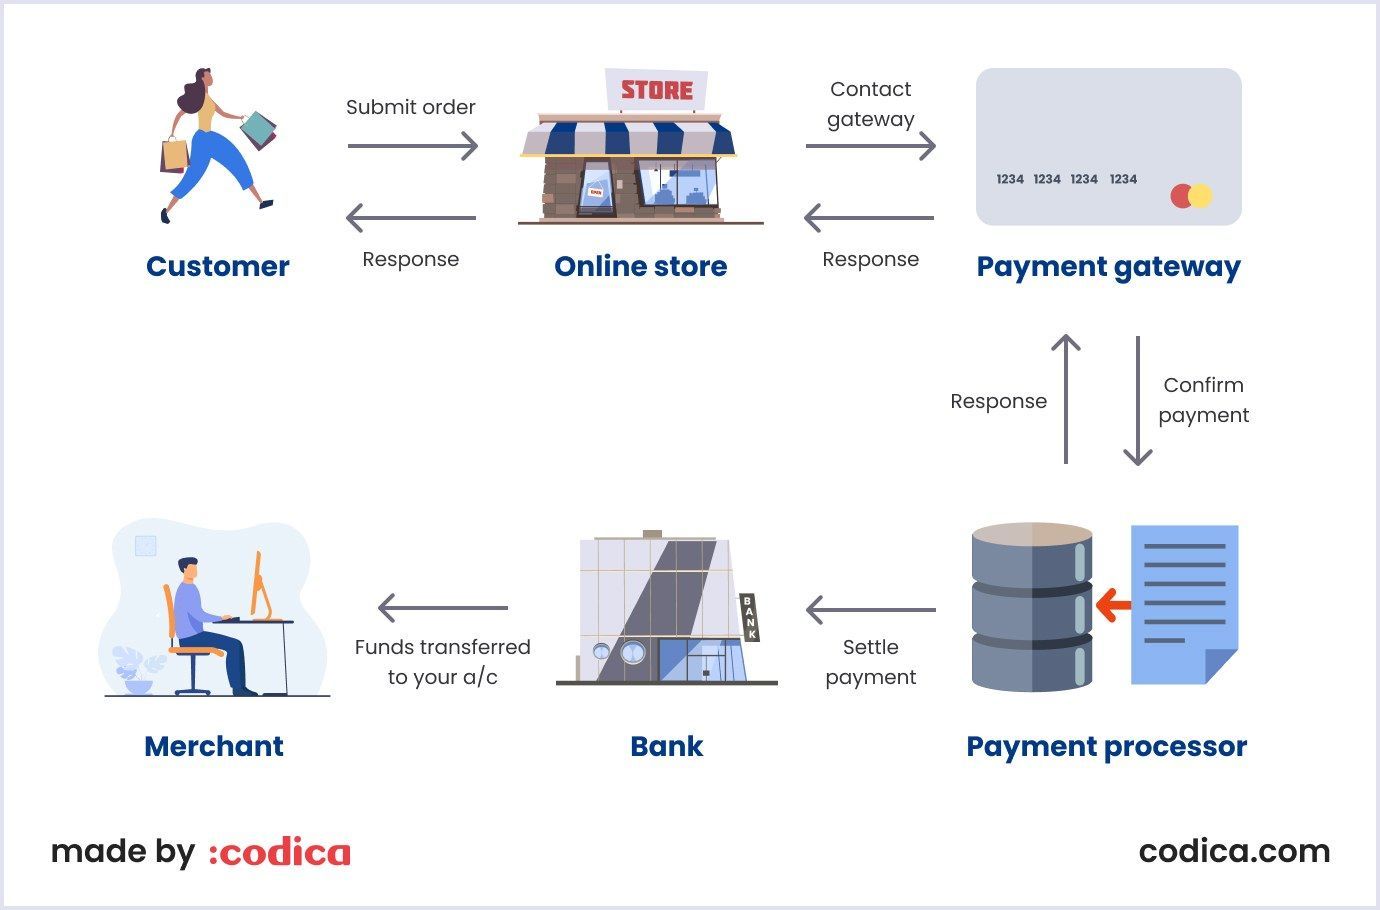 The process of work of payment gateways